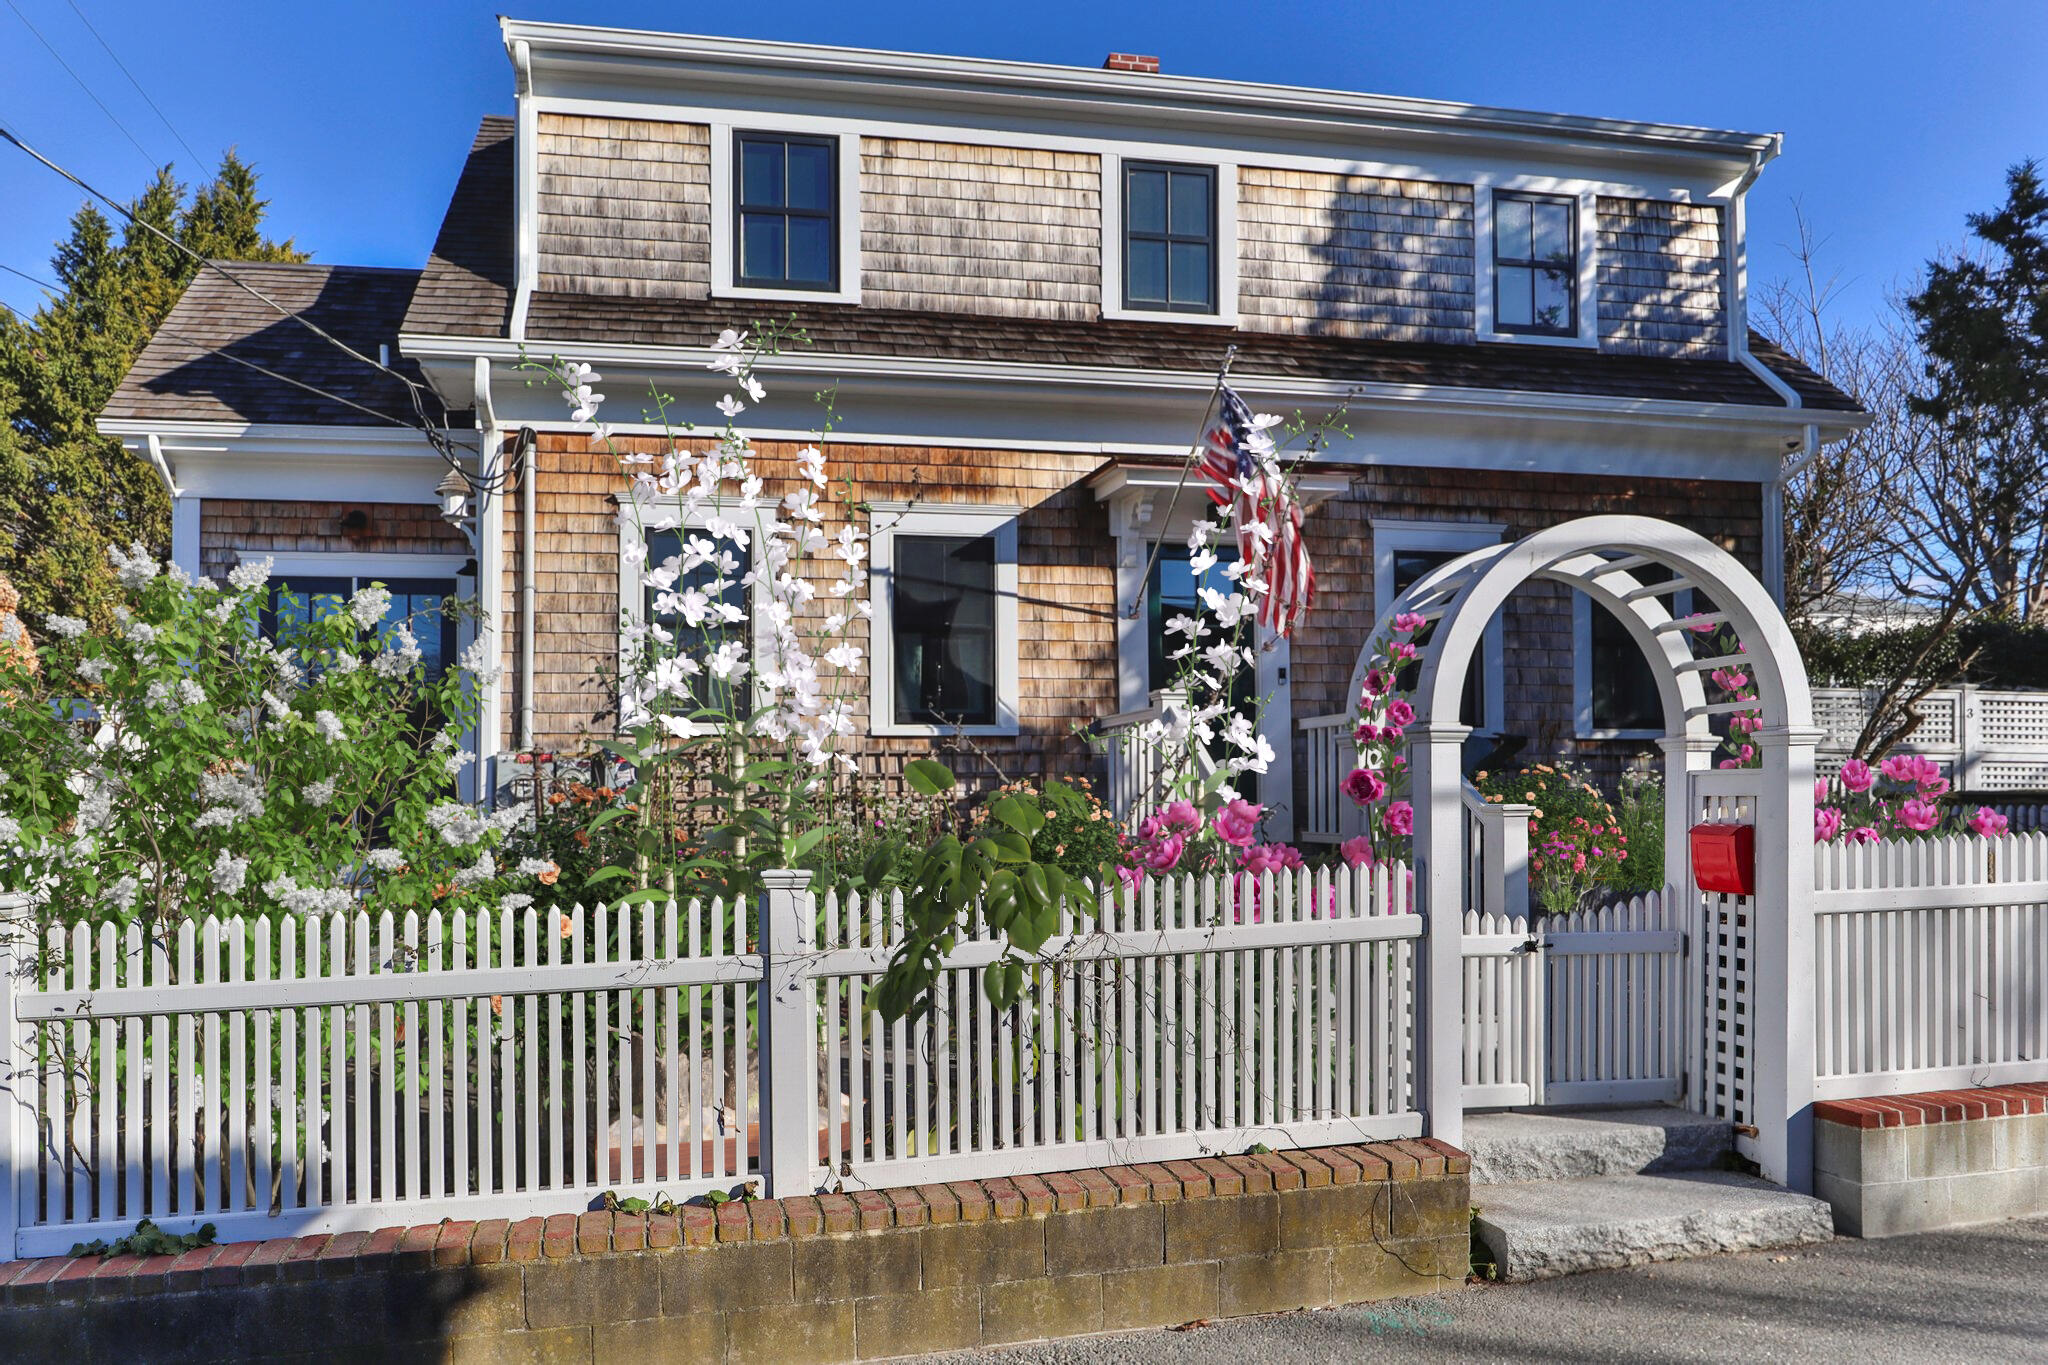 7 Conway Street, Provincetown, Massachusetts 02657, 2 Bedrooms Bedrooms, 4 Rooms Rooms,2 BathroomsBathrooms,Residential,For Sale,7 Conway Street,22400063